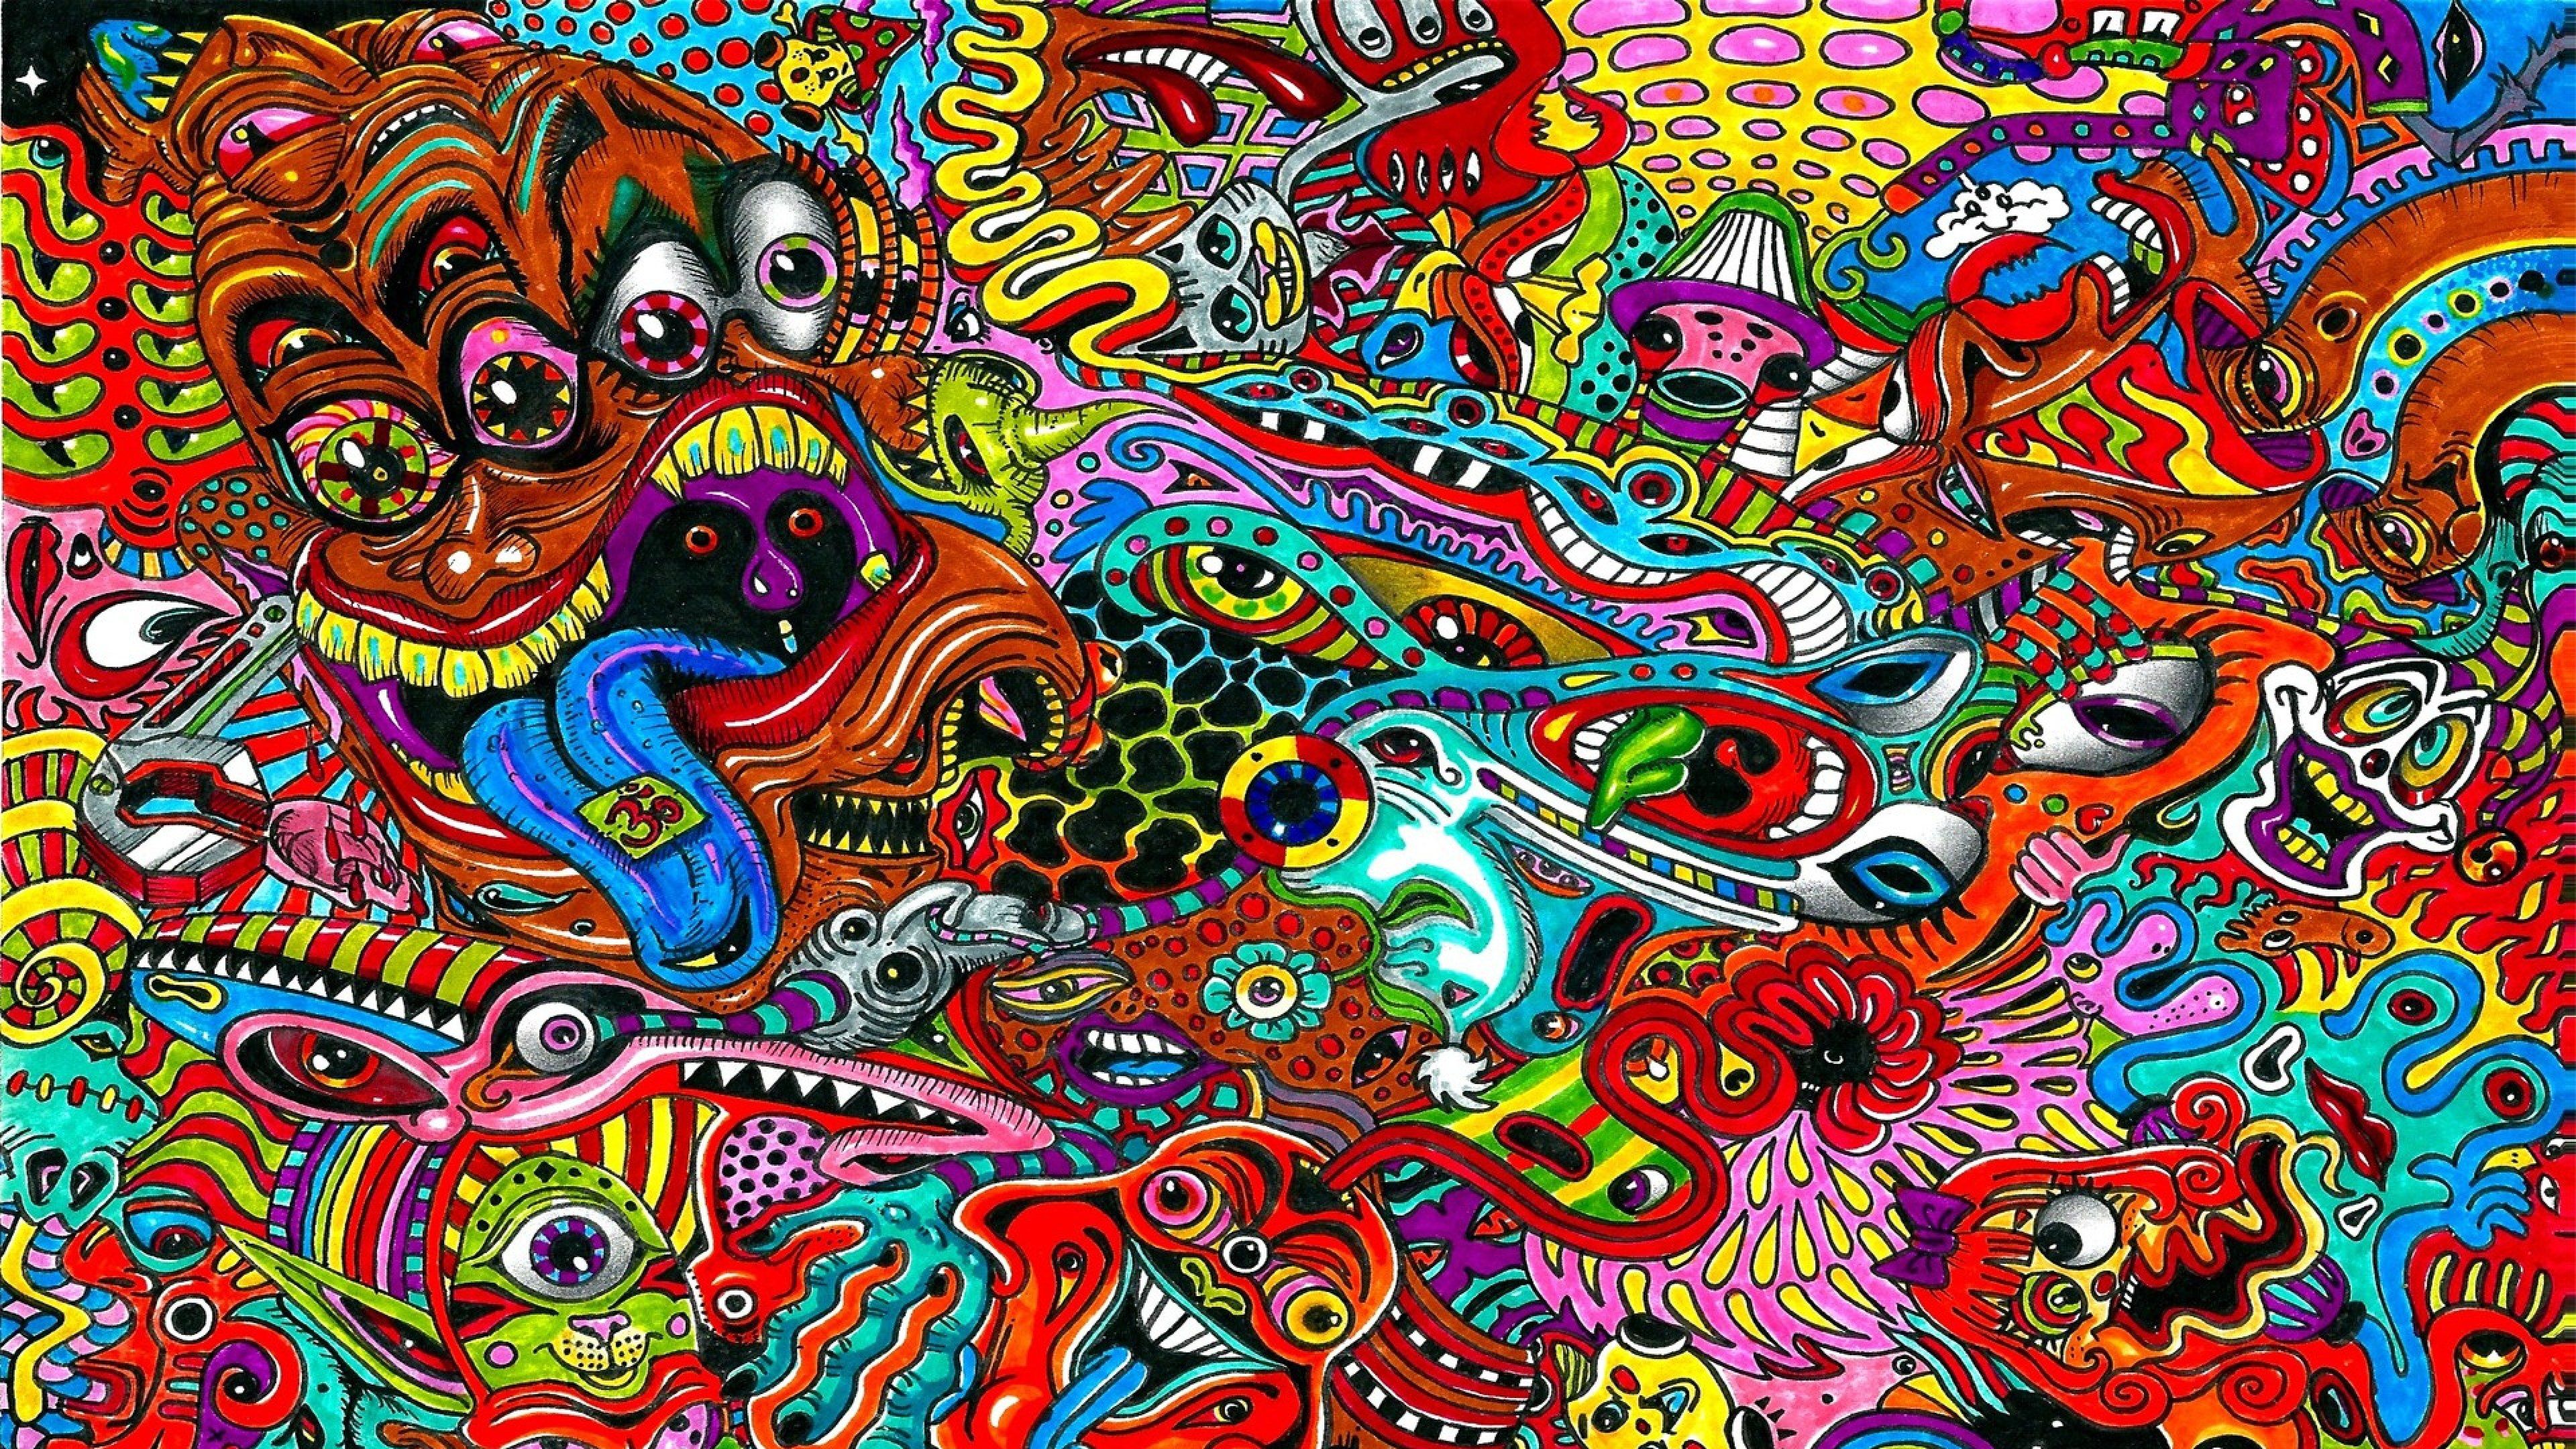 A trippy, colorful, abstract image with many shapes and colors. - Psychedelic